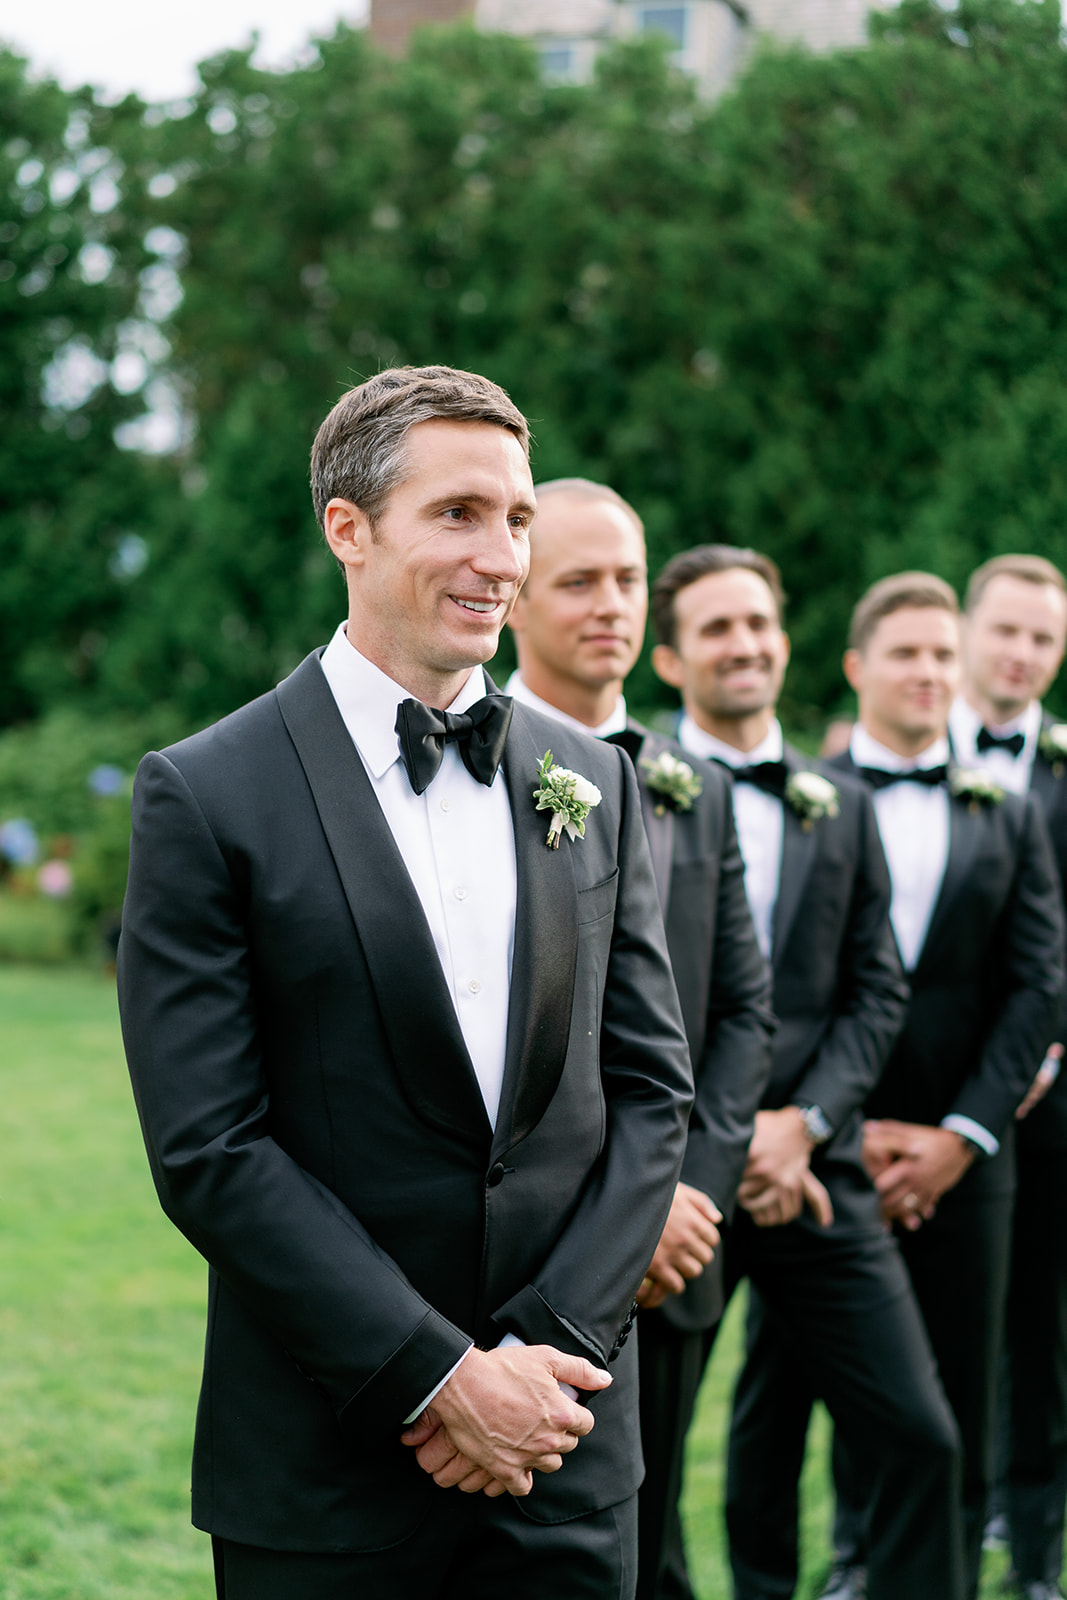 Groom smiling with his groomsmen in the background as he watches his bride walking down the aisle. 